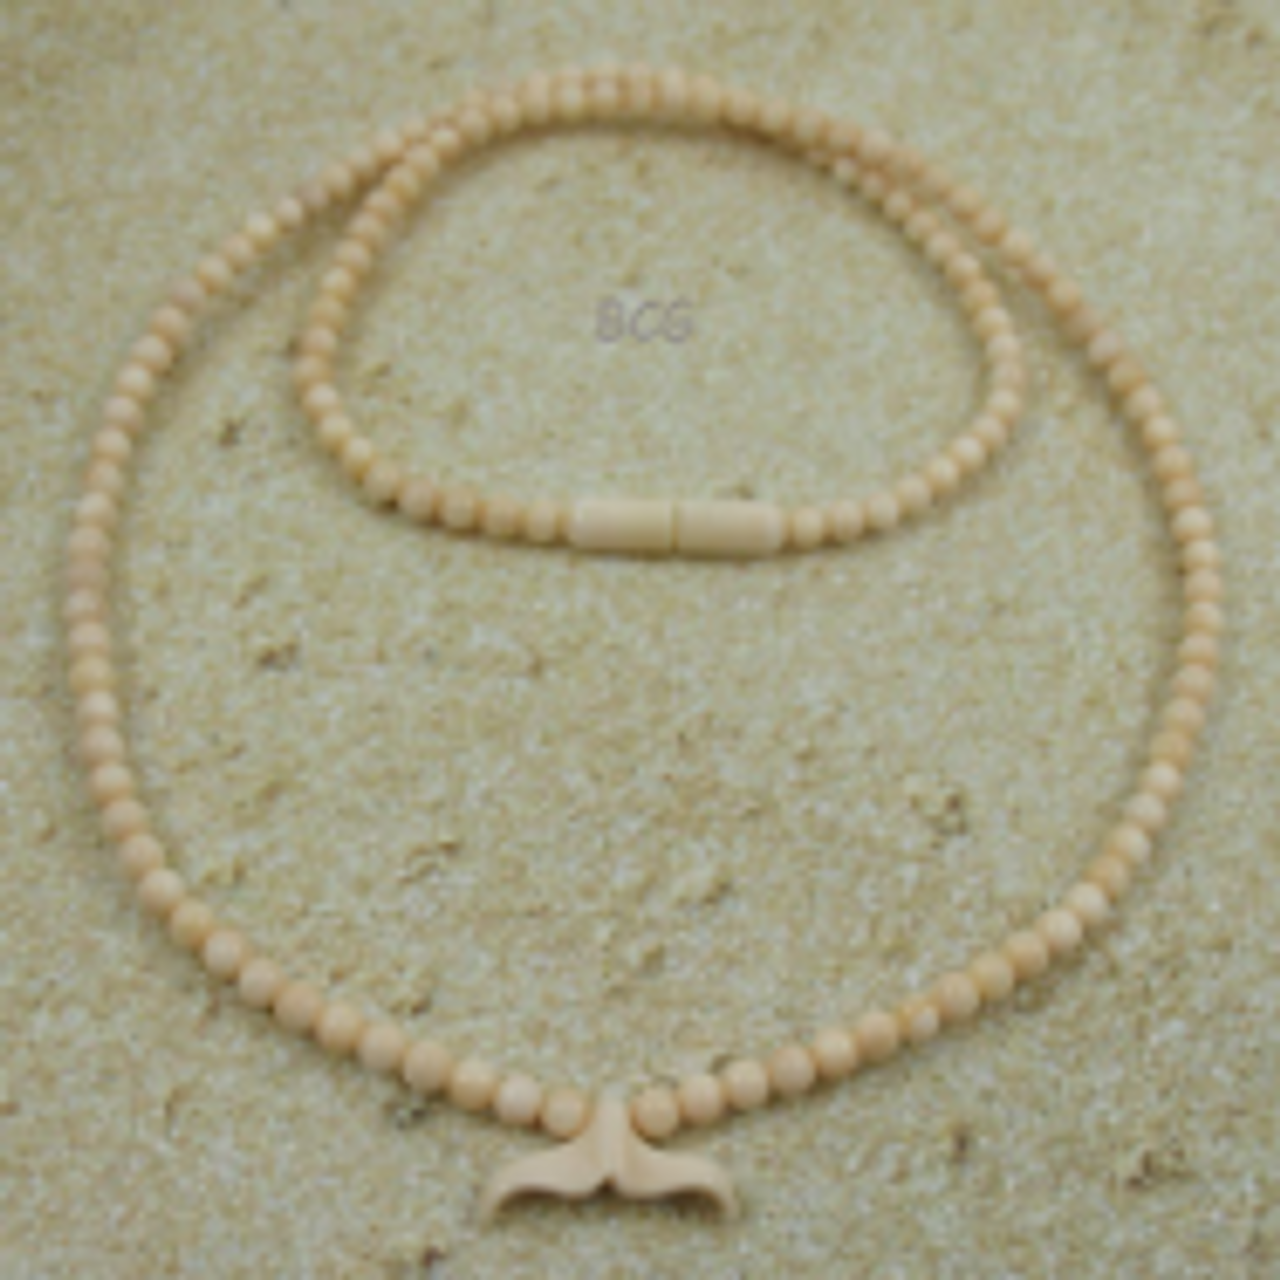 Mammoth Ivory Necklaces